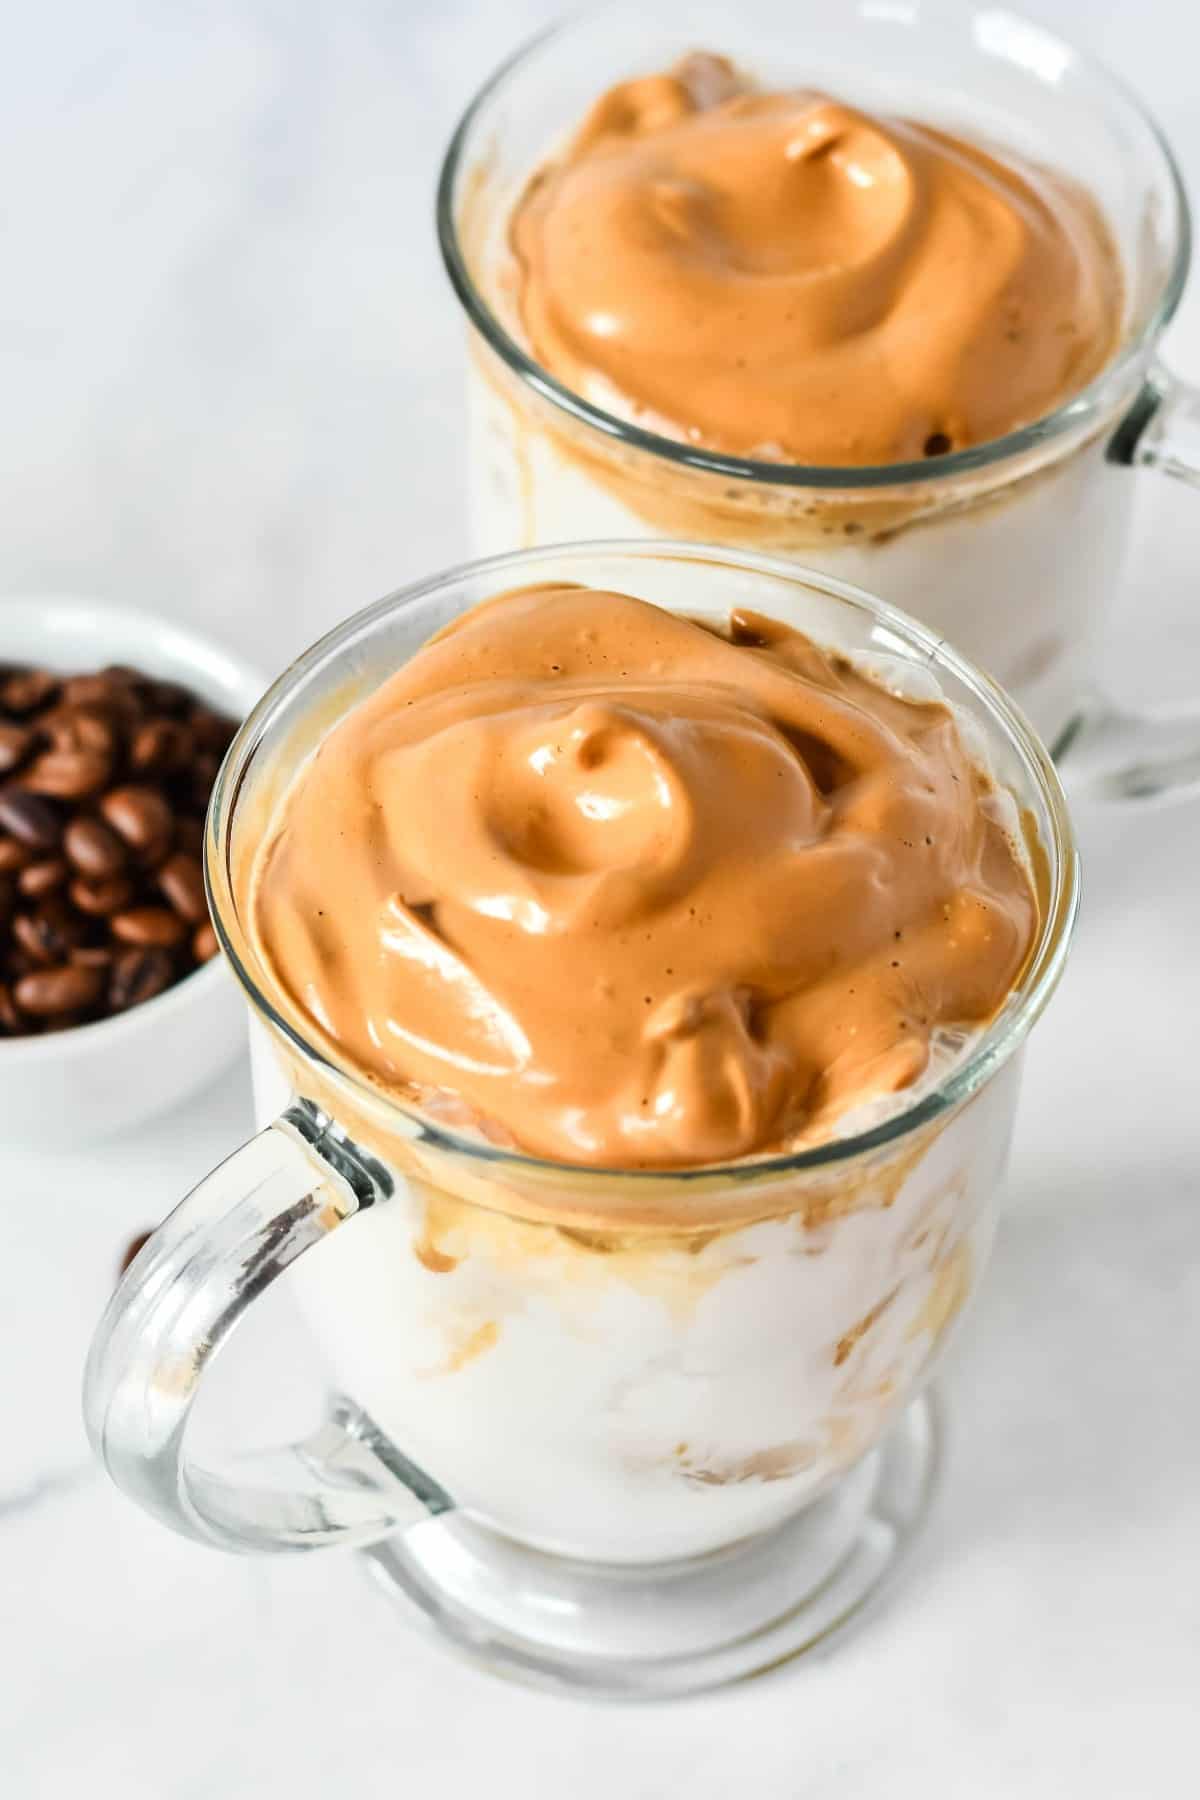 Two clear glass mugs are tilted forward showing a closeup of a thick caramel colored creamy topping.